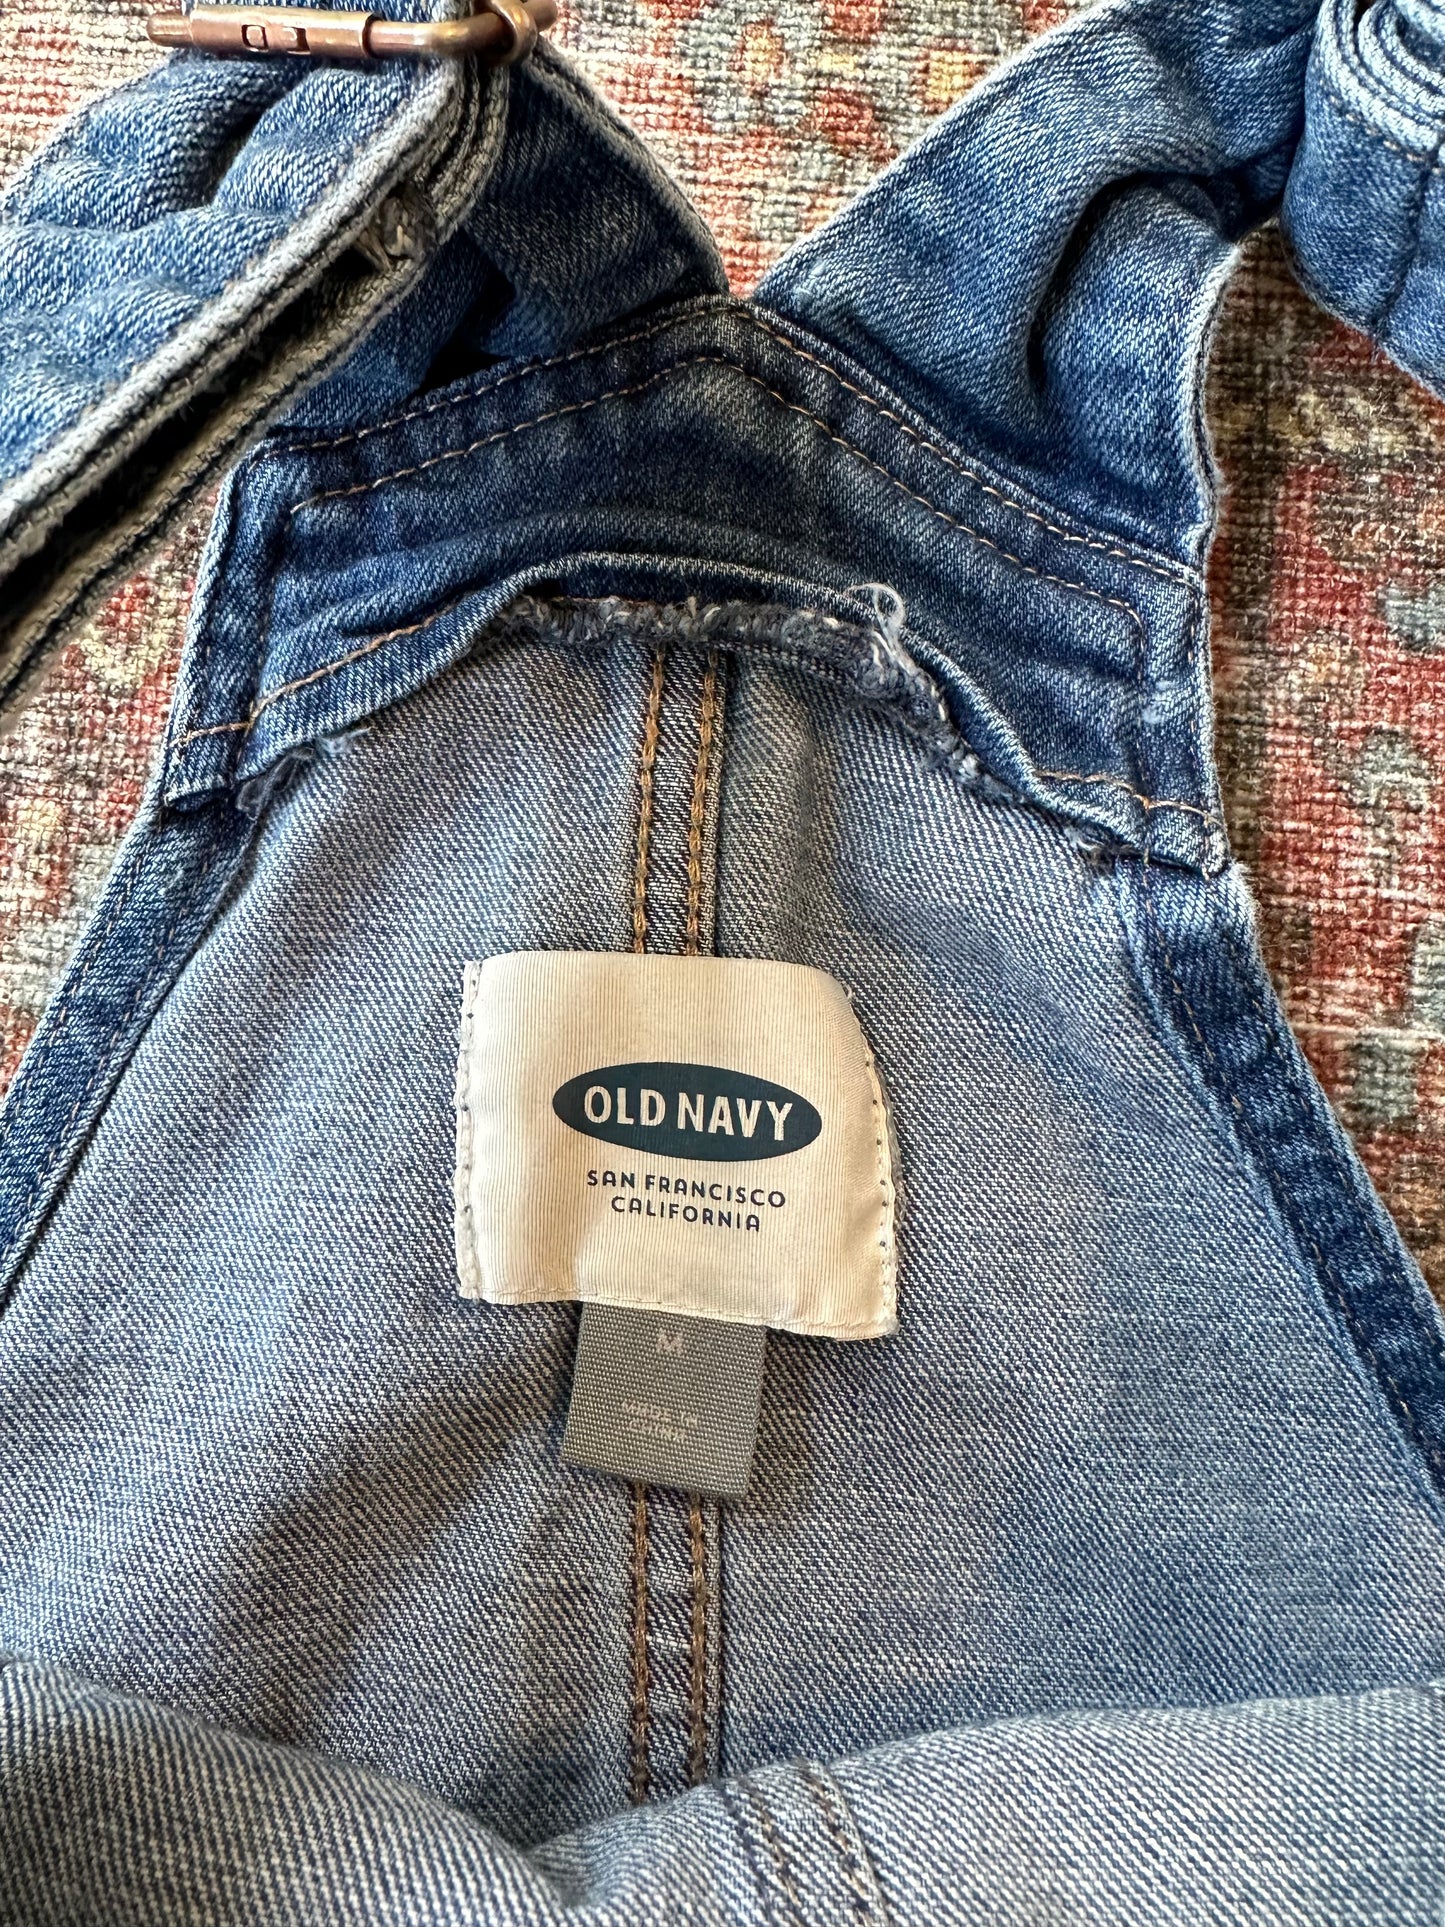 Old Navy Overalls